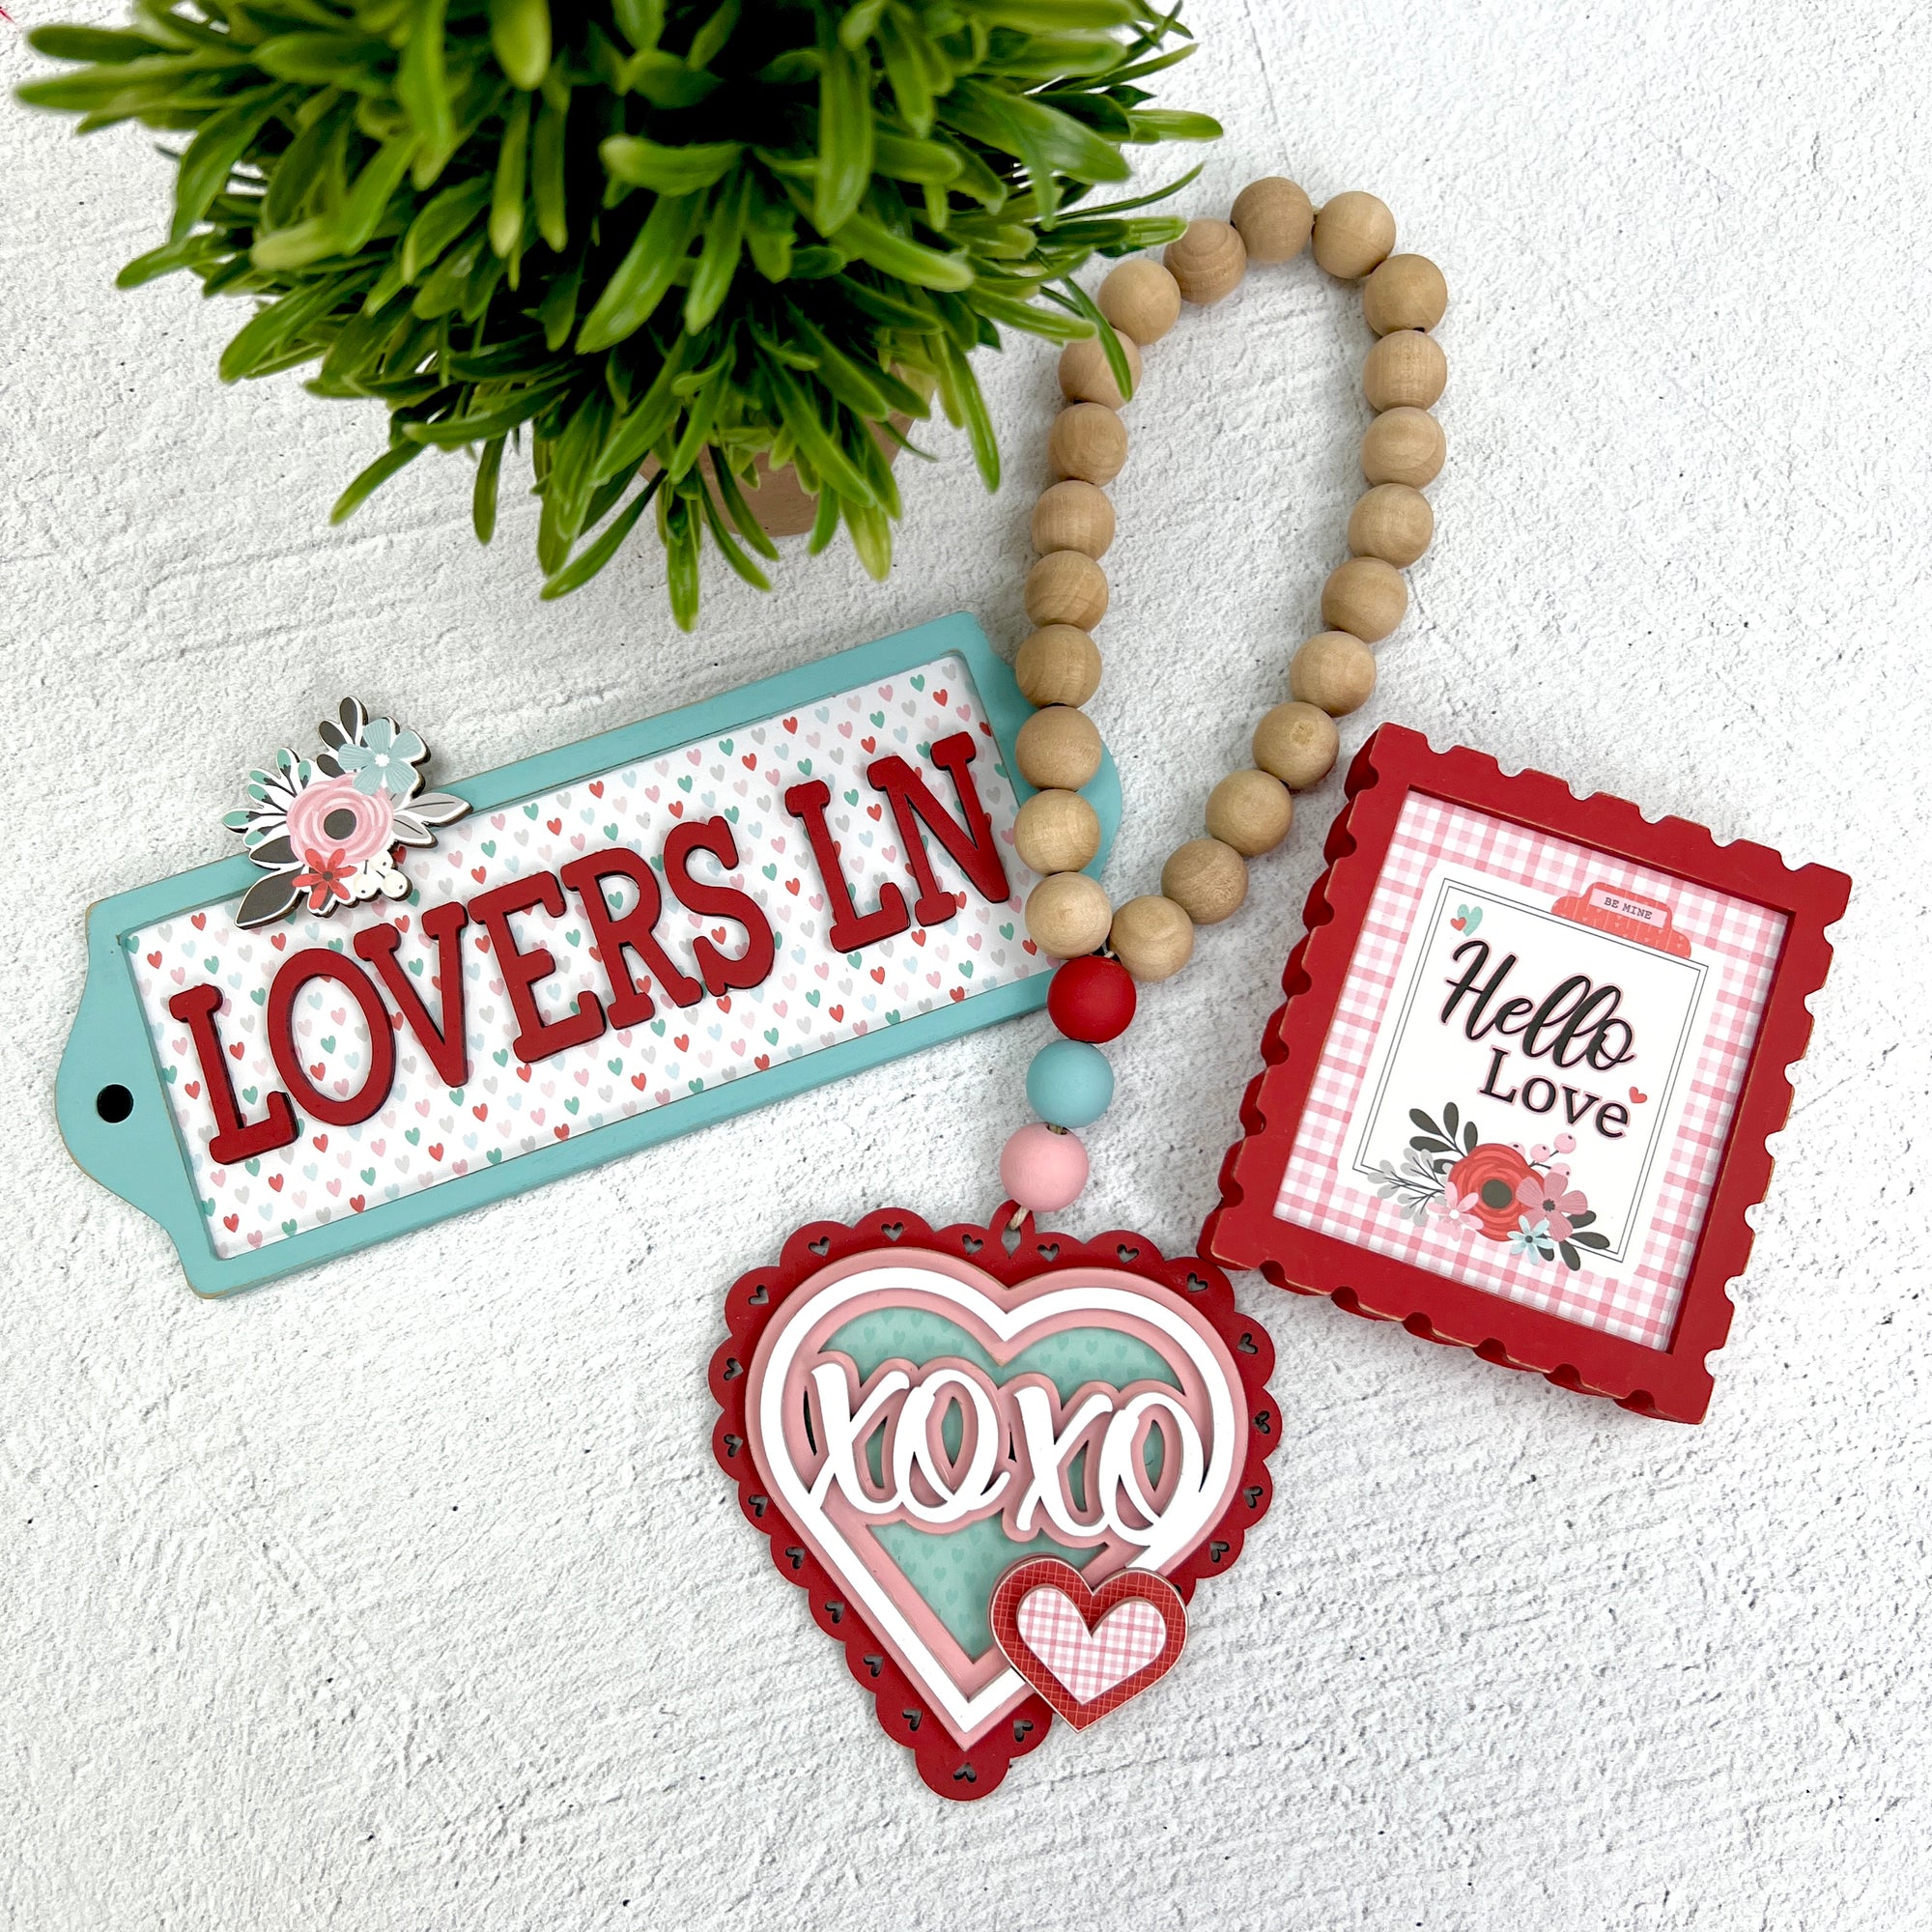 Lovers lane, hello love, and hugs and kisses Valentine wood signs for tiered tray, table top, and mantel decorations